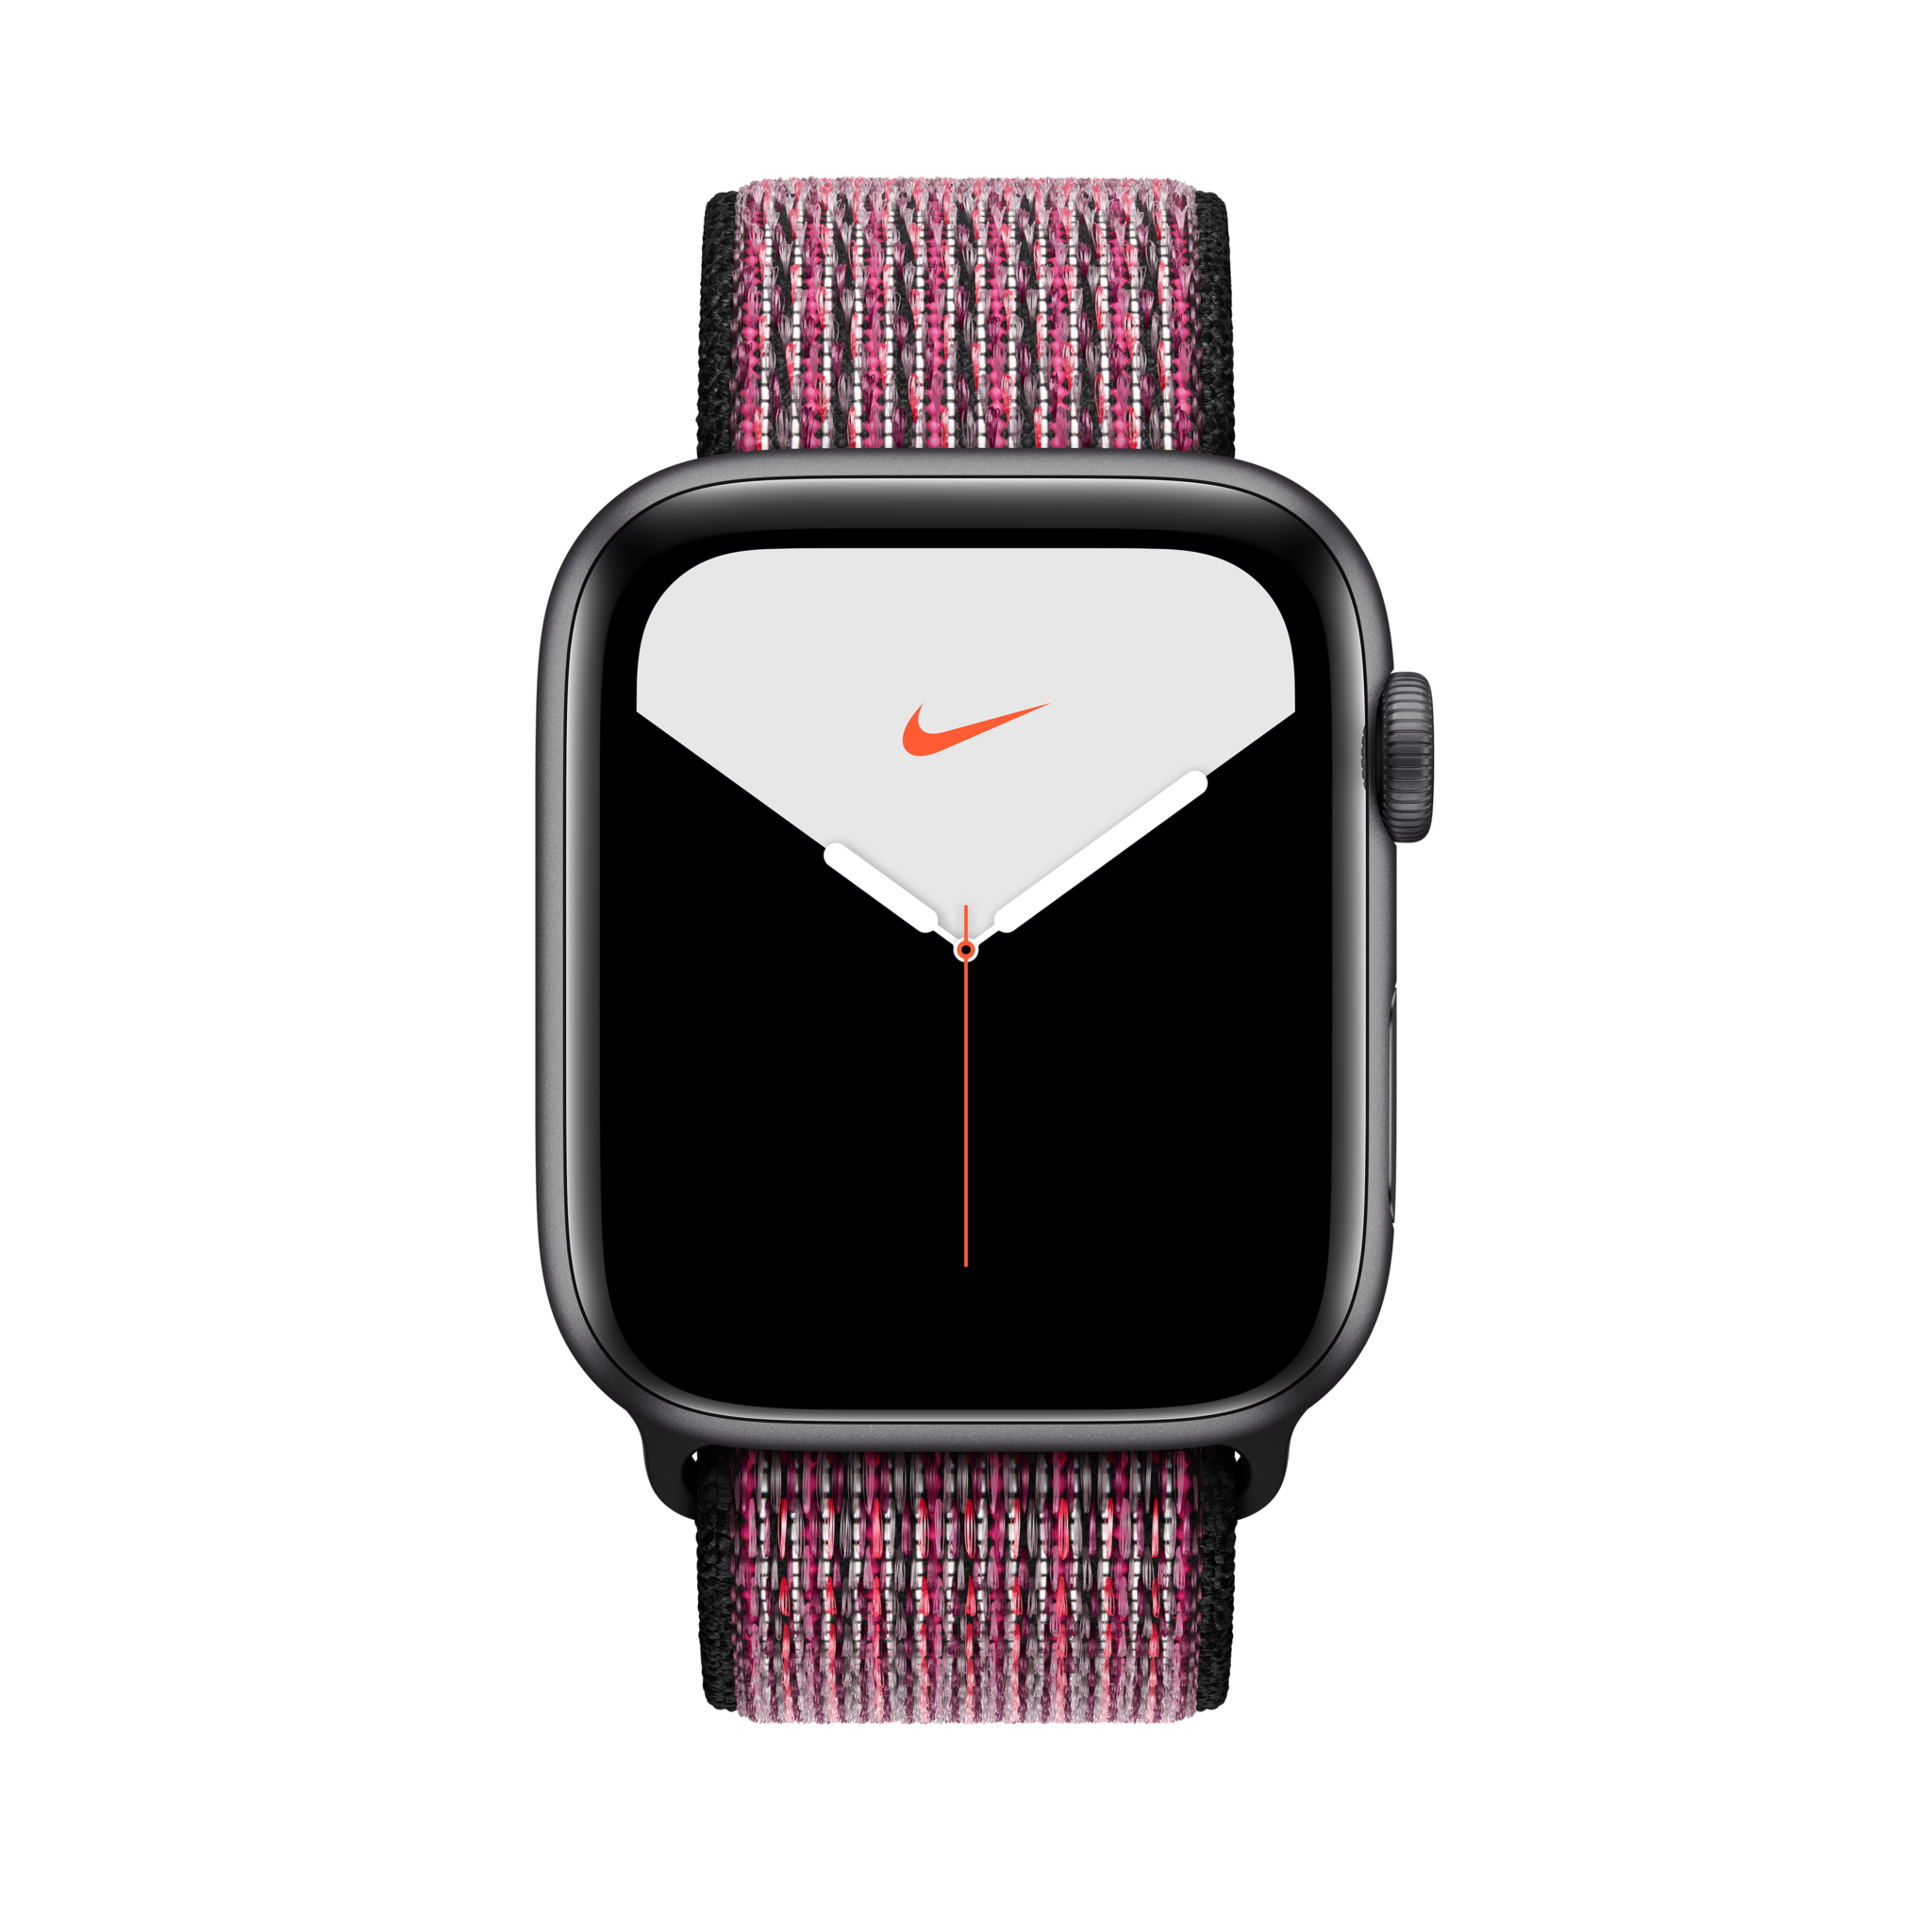 Run Club now available as stand-alone app for Apple Watch | iMore